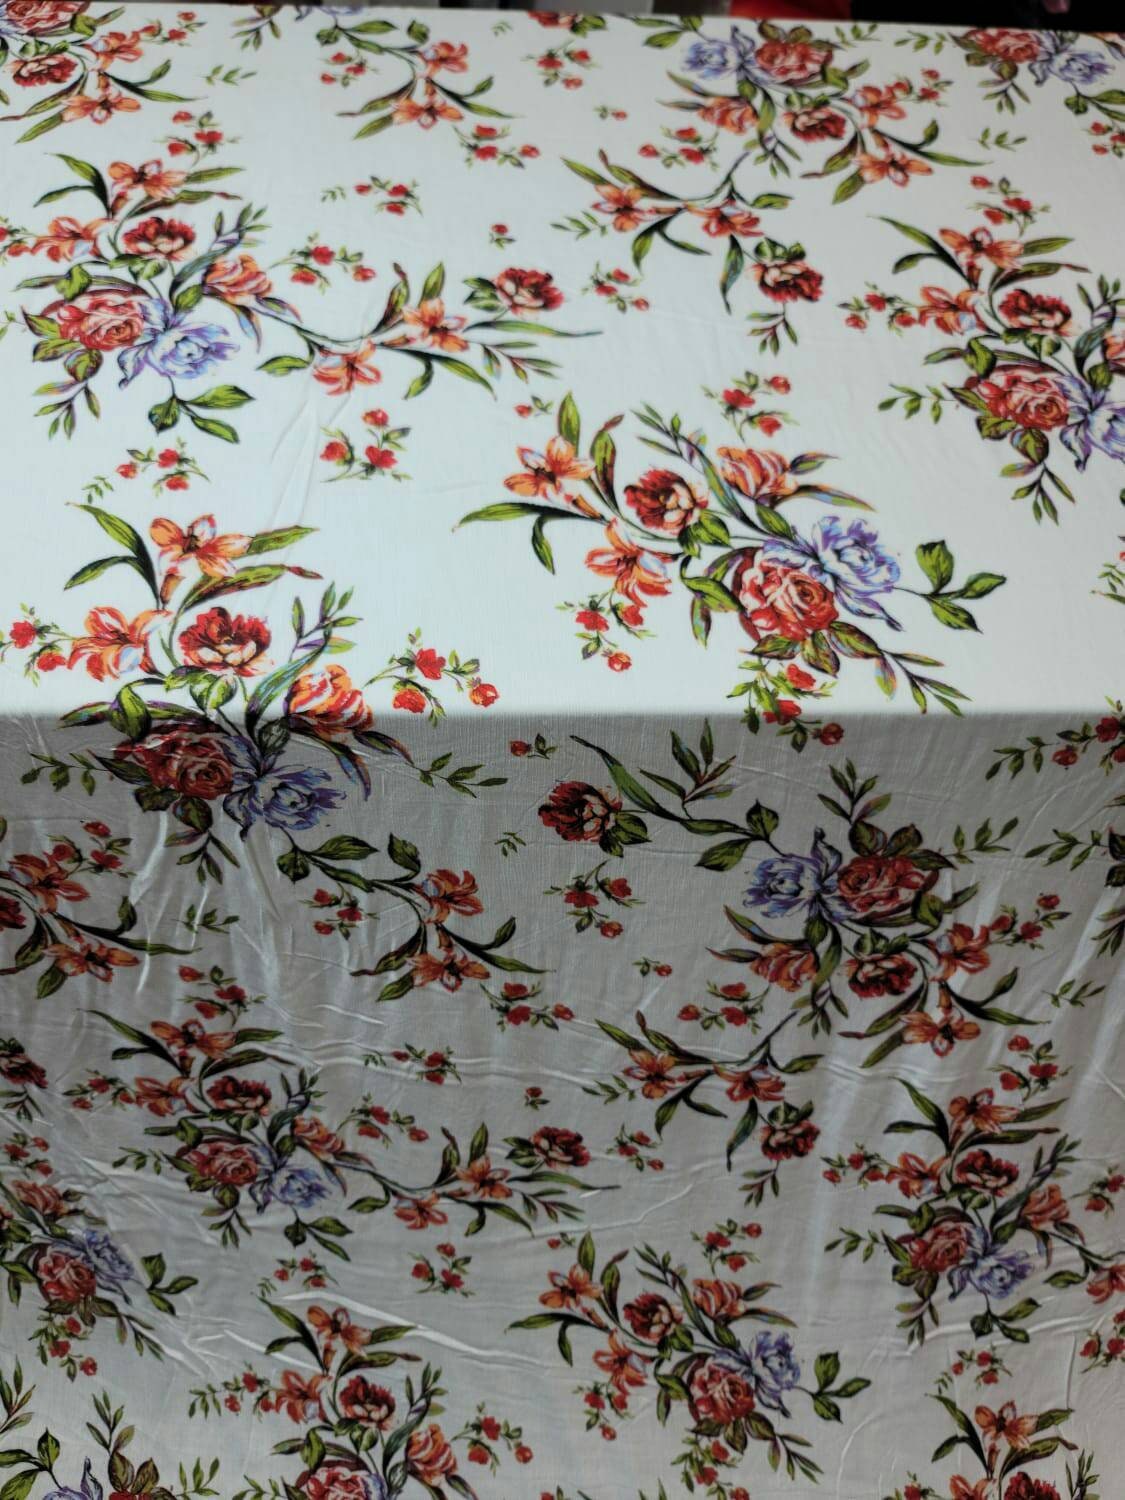 Rayon Crepe Off White Background Coral Red Green Floral Flowers 58-60 Inches Wide. Fabric By The Yard Soft Organic kids Dress Clothing Flowy